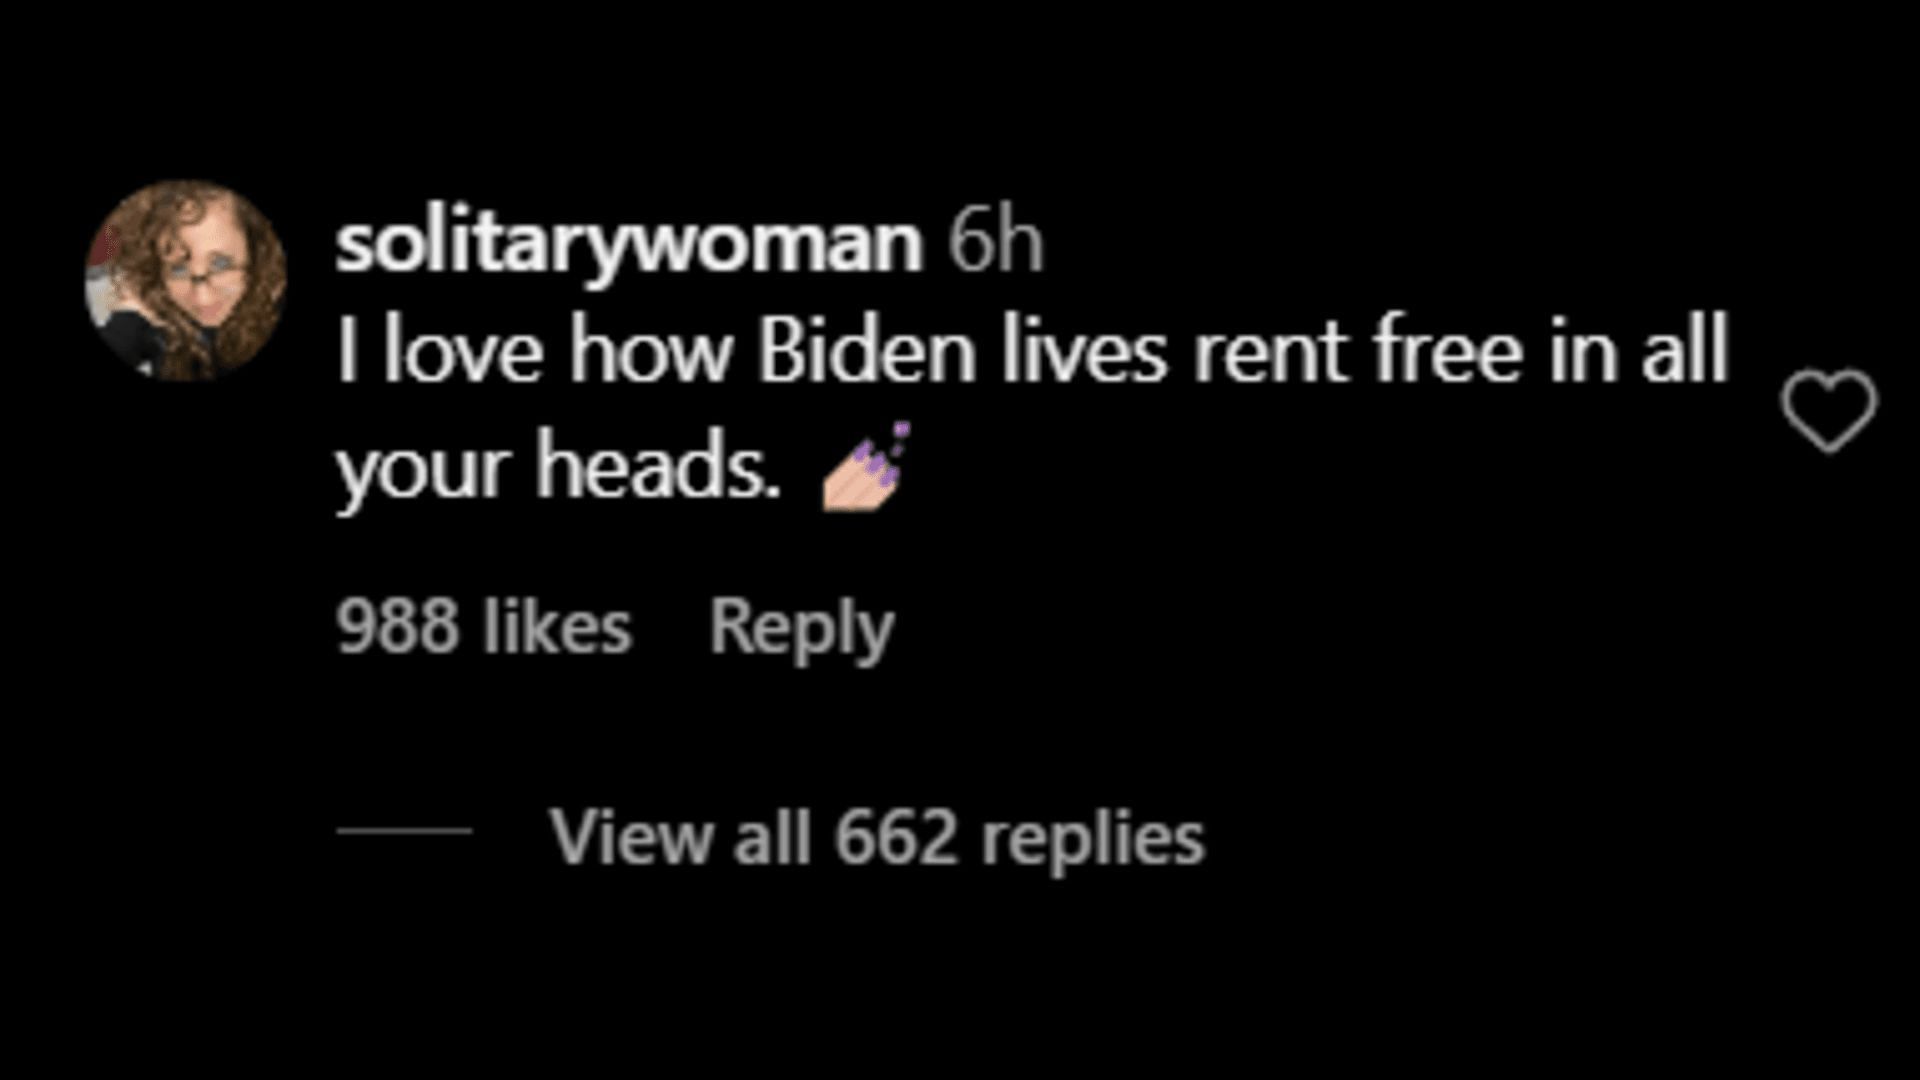 A netizen takes a dig at Trump. (Image via Instagram/solitarywoman)